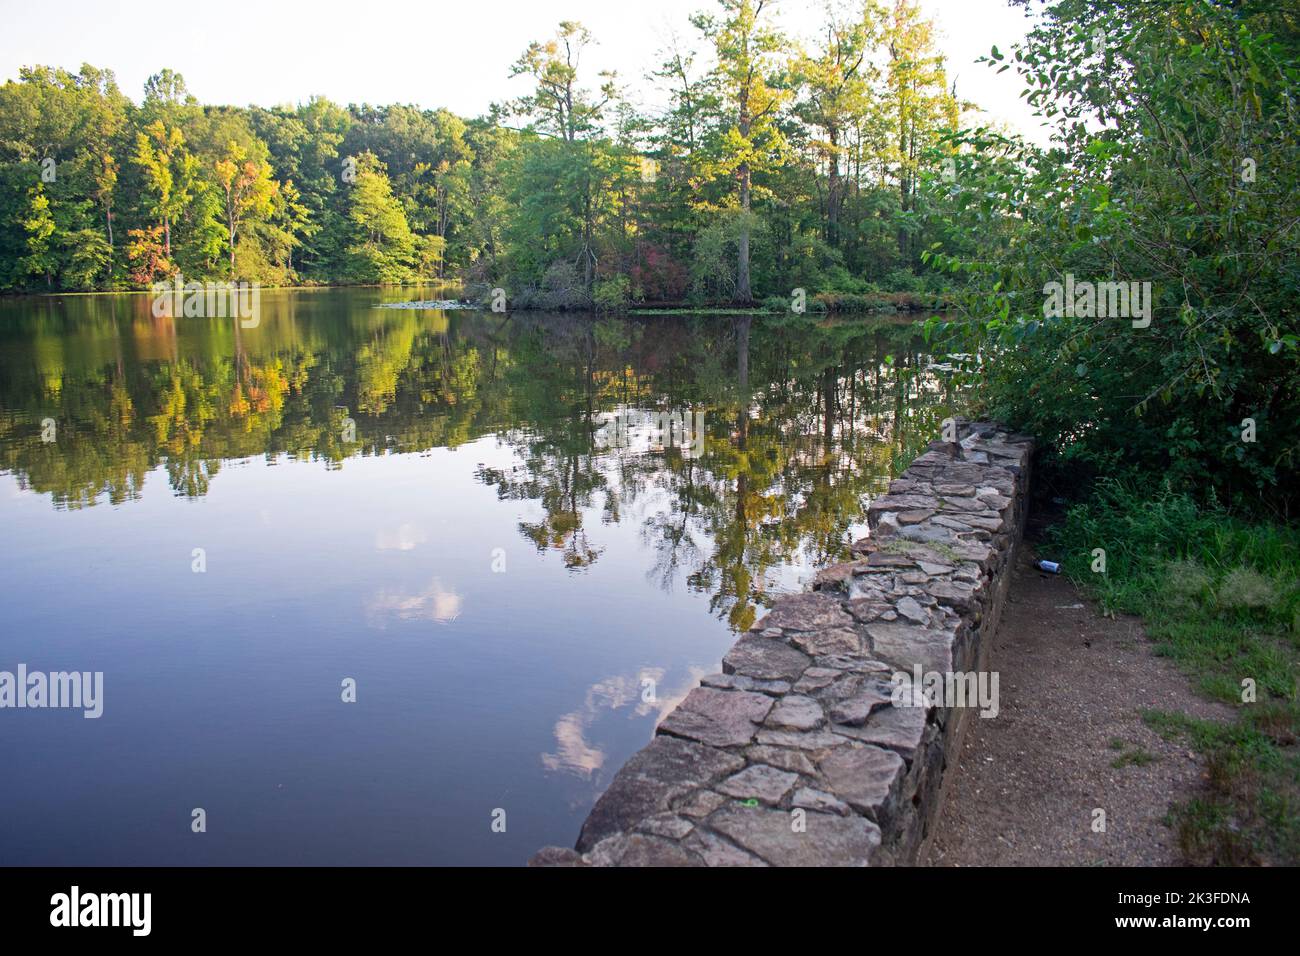 Reflections of trees and leaves in lake at Davidson's Mill Pond Park on a bright sunny day -13 Stock Photo